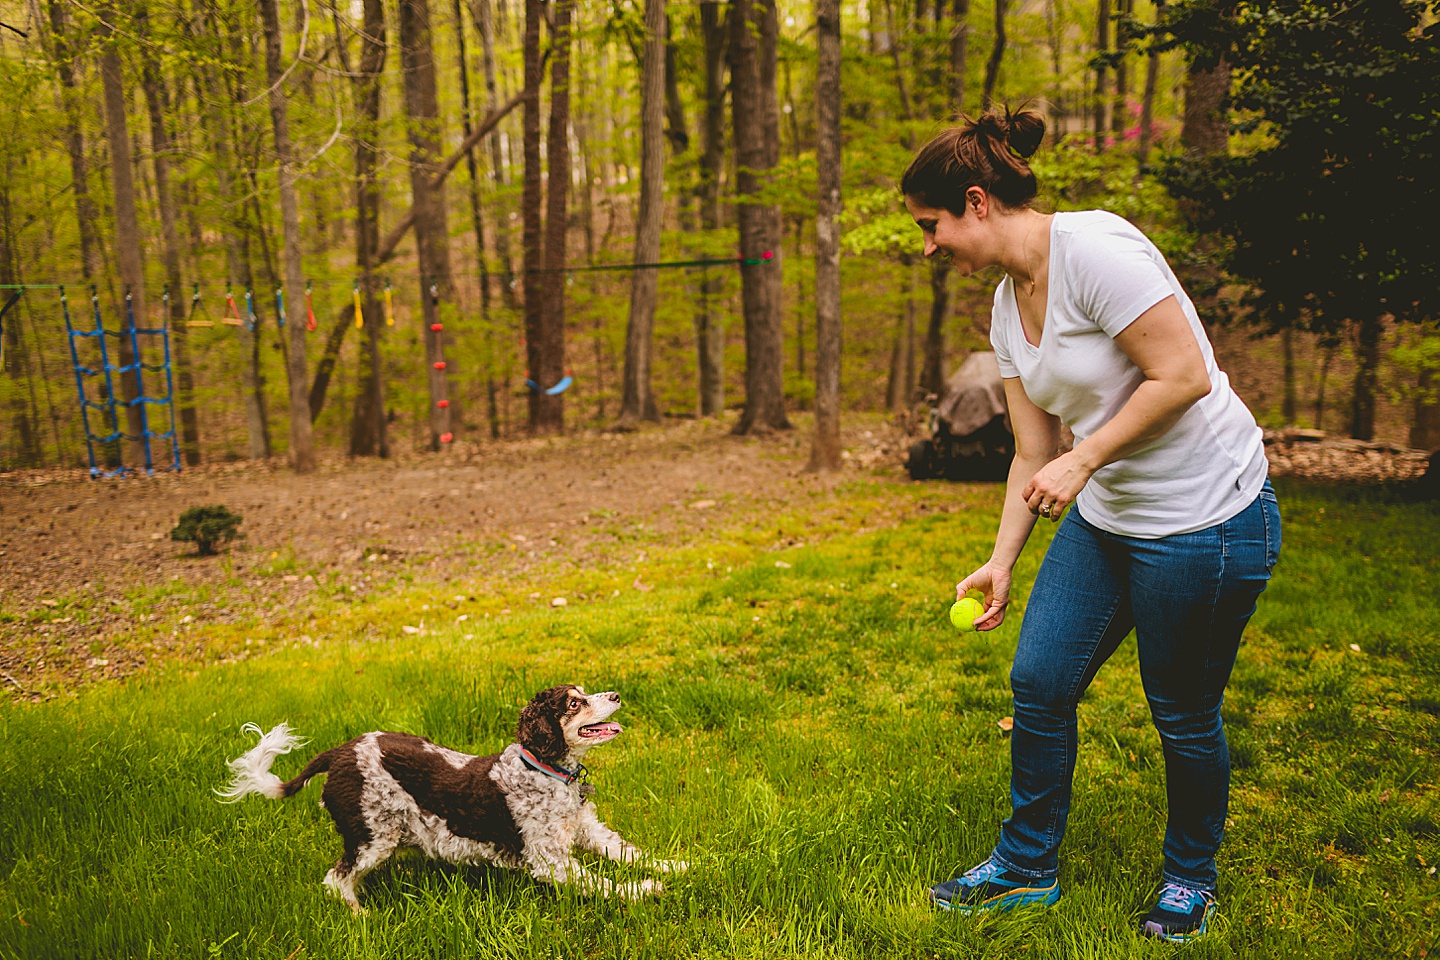 Mom throwing tennis ball for a dog